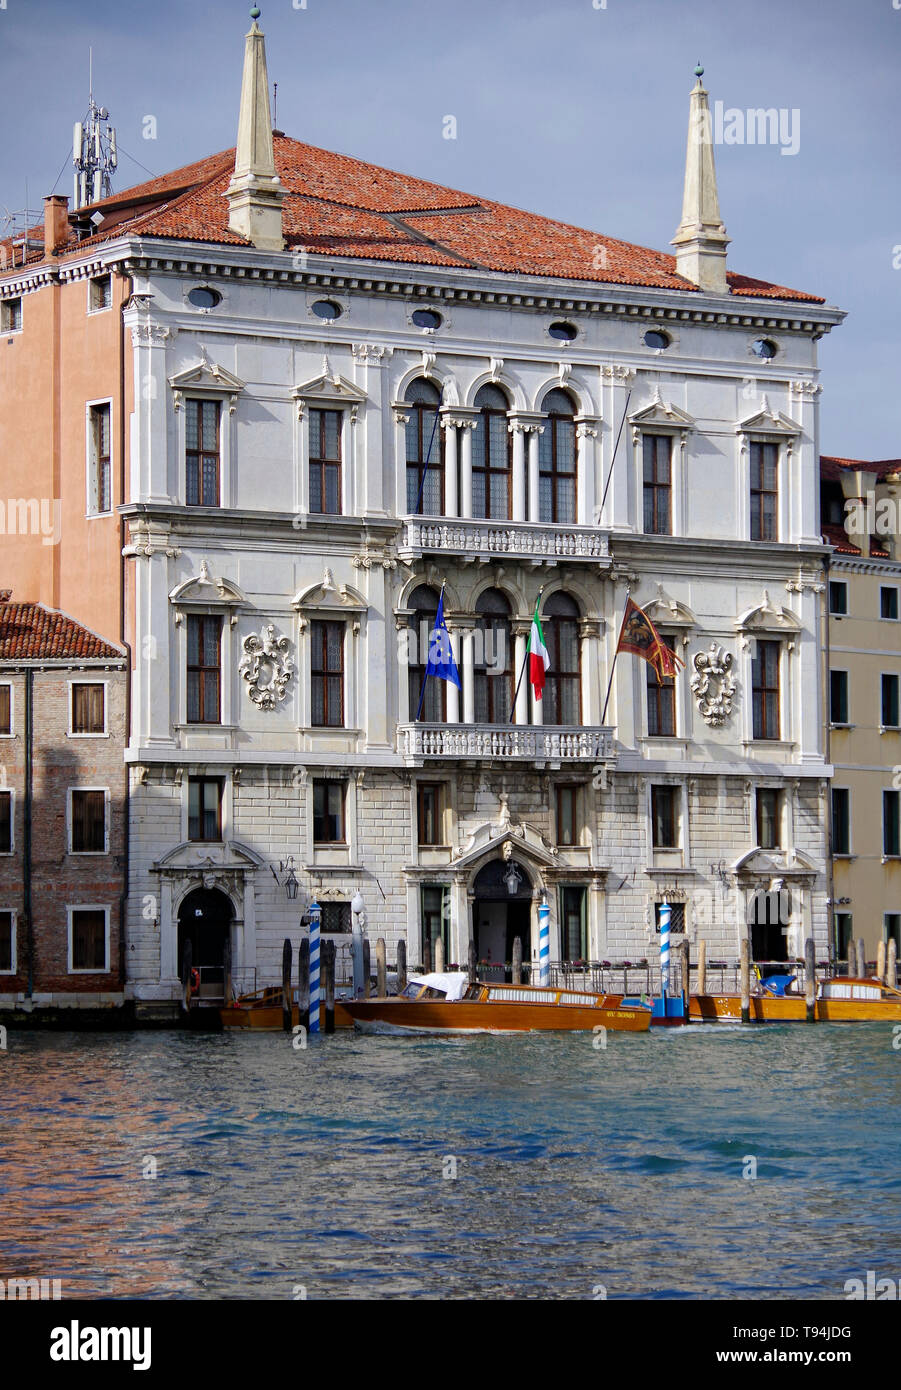 The Palazzo Balbi, a late Sixteenth century palace in Renaissance style with some early Baroque features such as obelisks and broken pediments Stock Photo